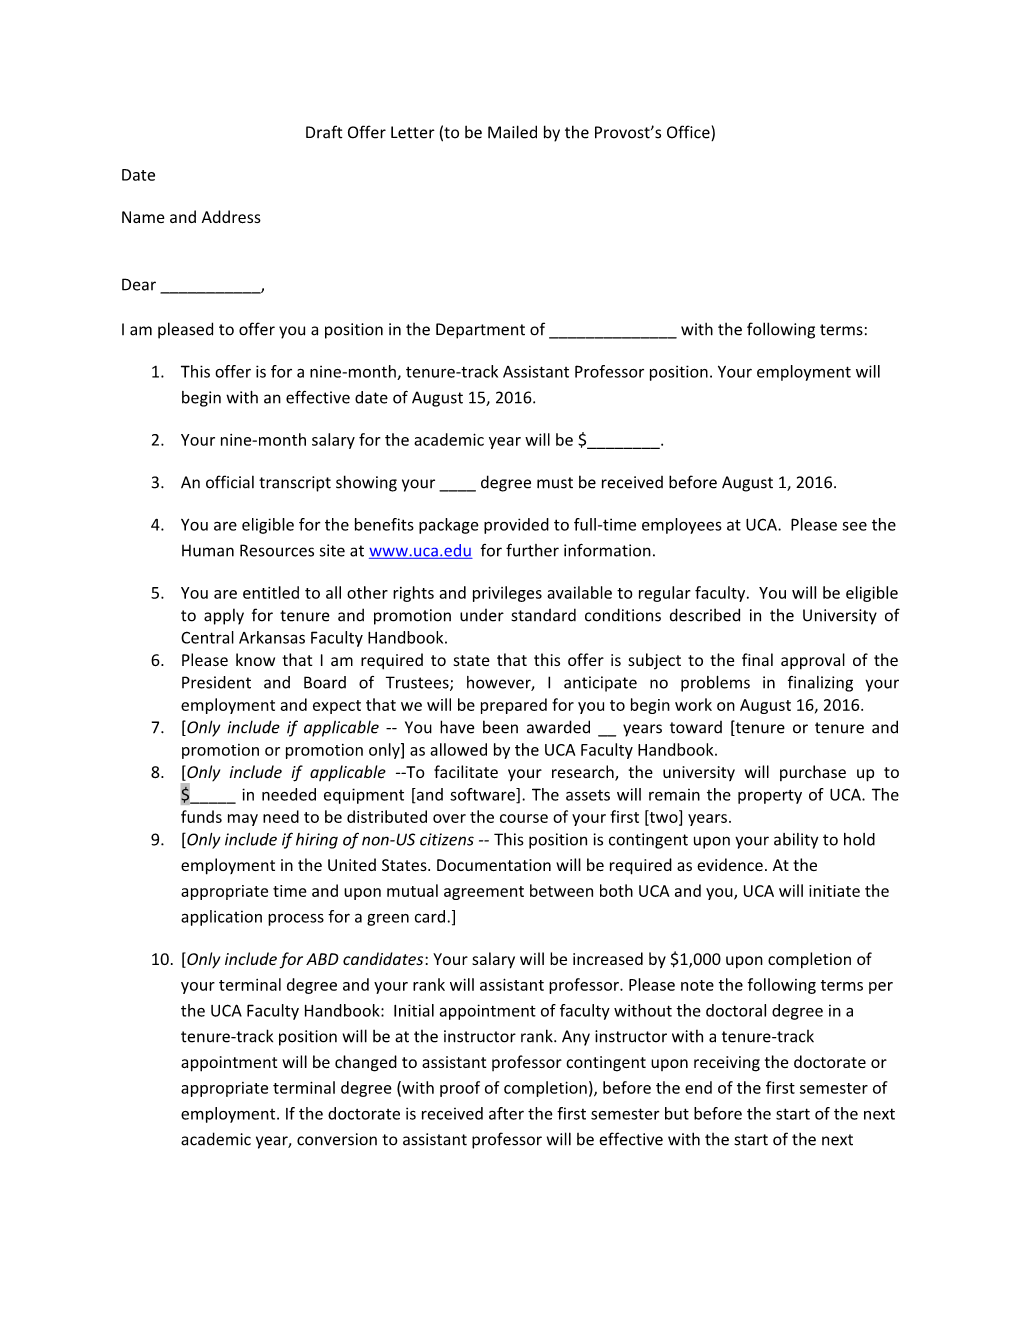 Draft Offer Letter (To Be Mailed by the Provost S Office)